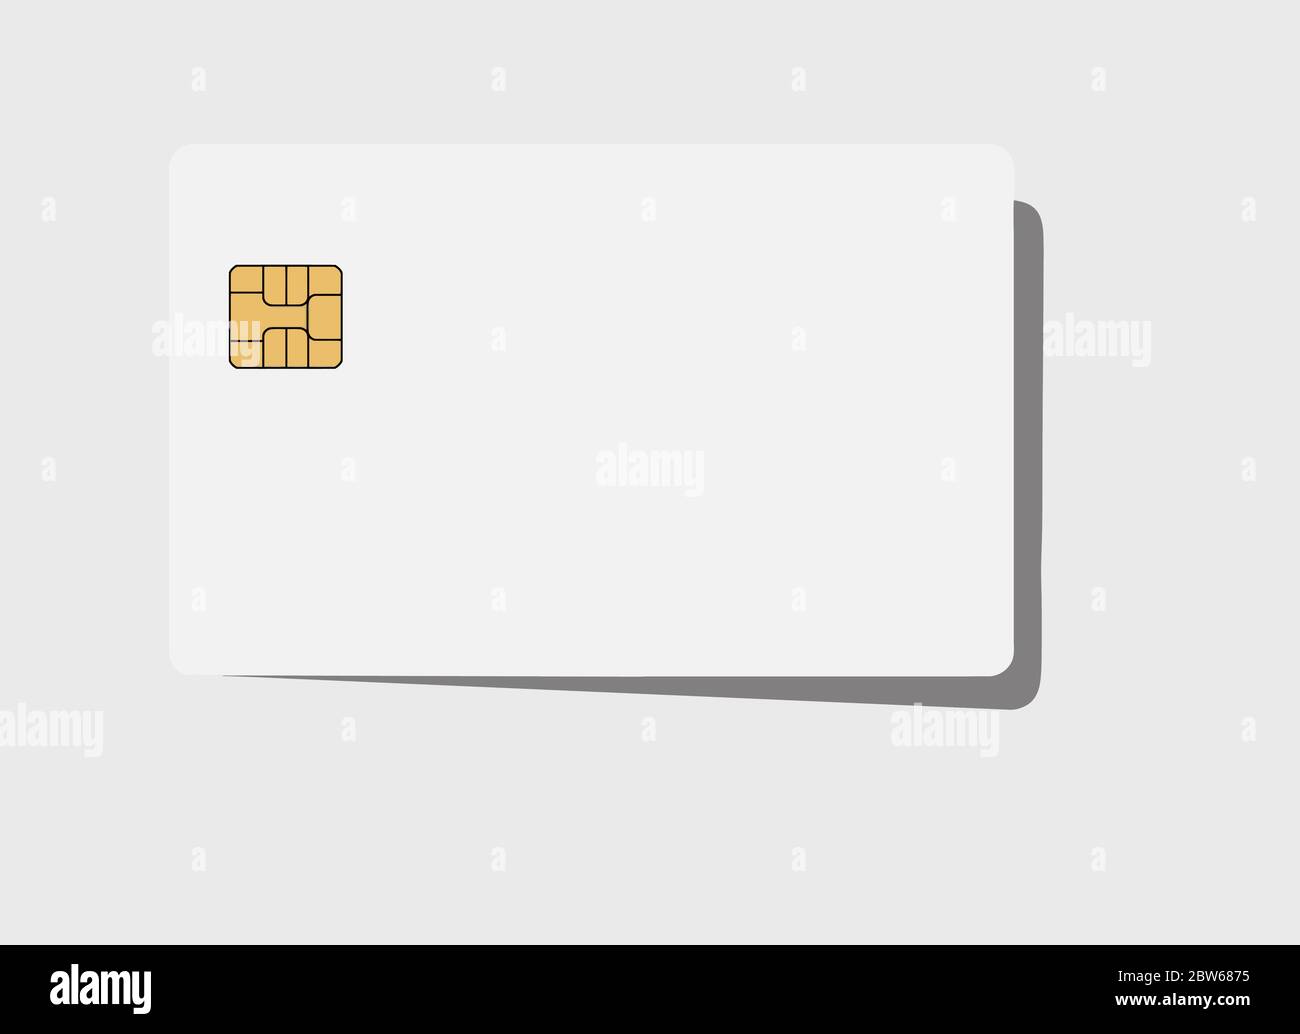 Here is a blank white credit or debit card with a golden EMV chip. Text area. Copy area.  The card casts a shadow on a light gray background. Stock Vector